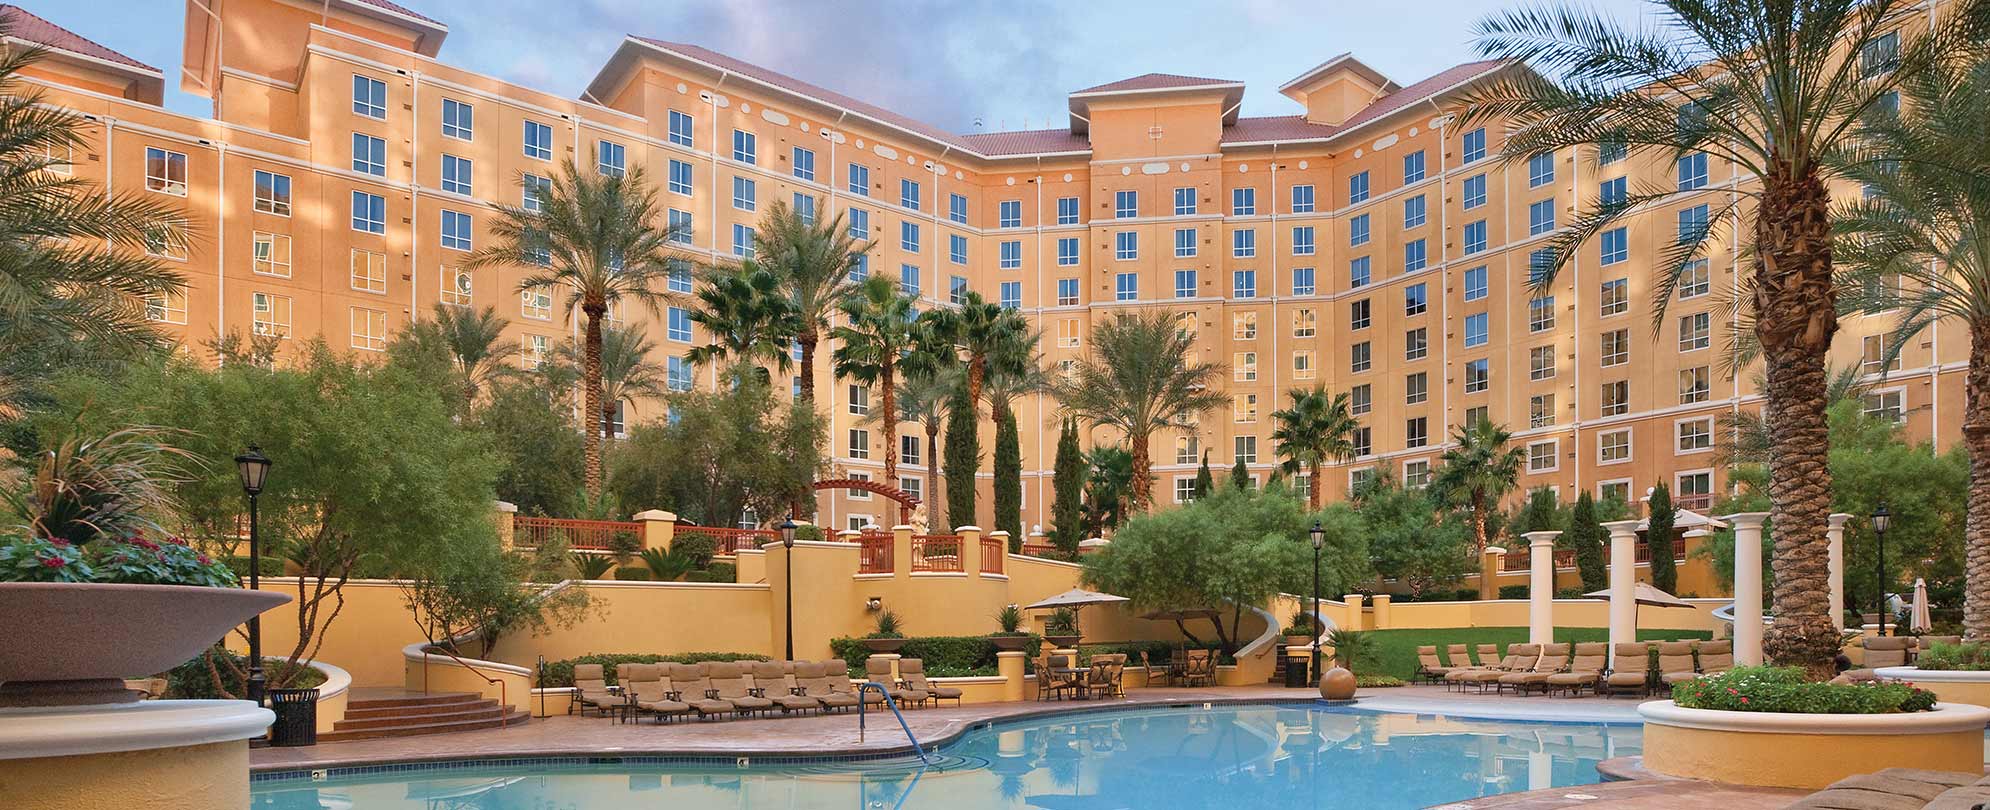 The Club Wyndham Grand Desert resort overlooking an outdoor pool with palm trees